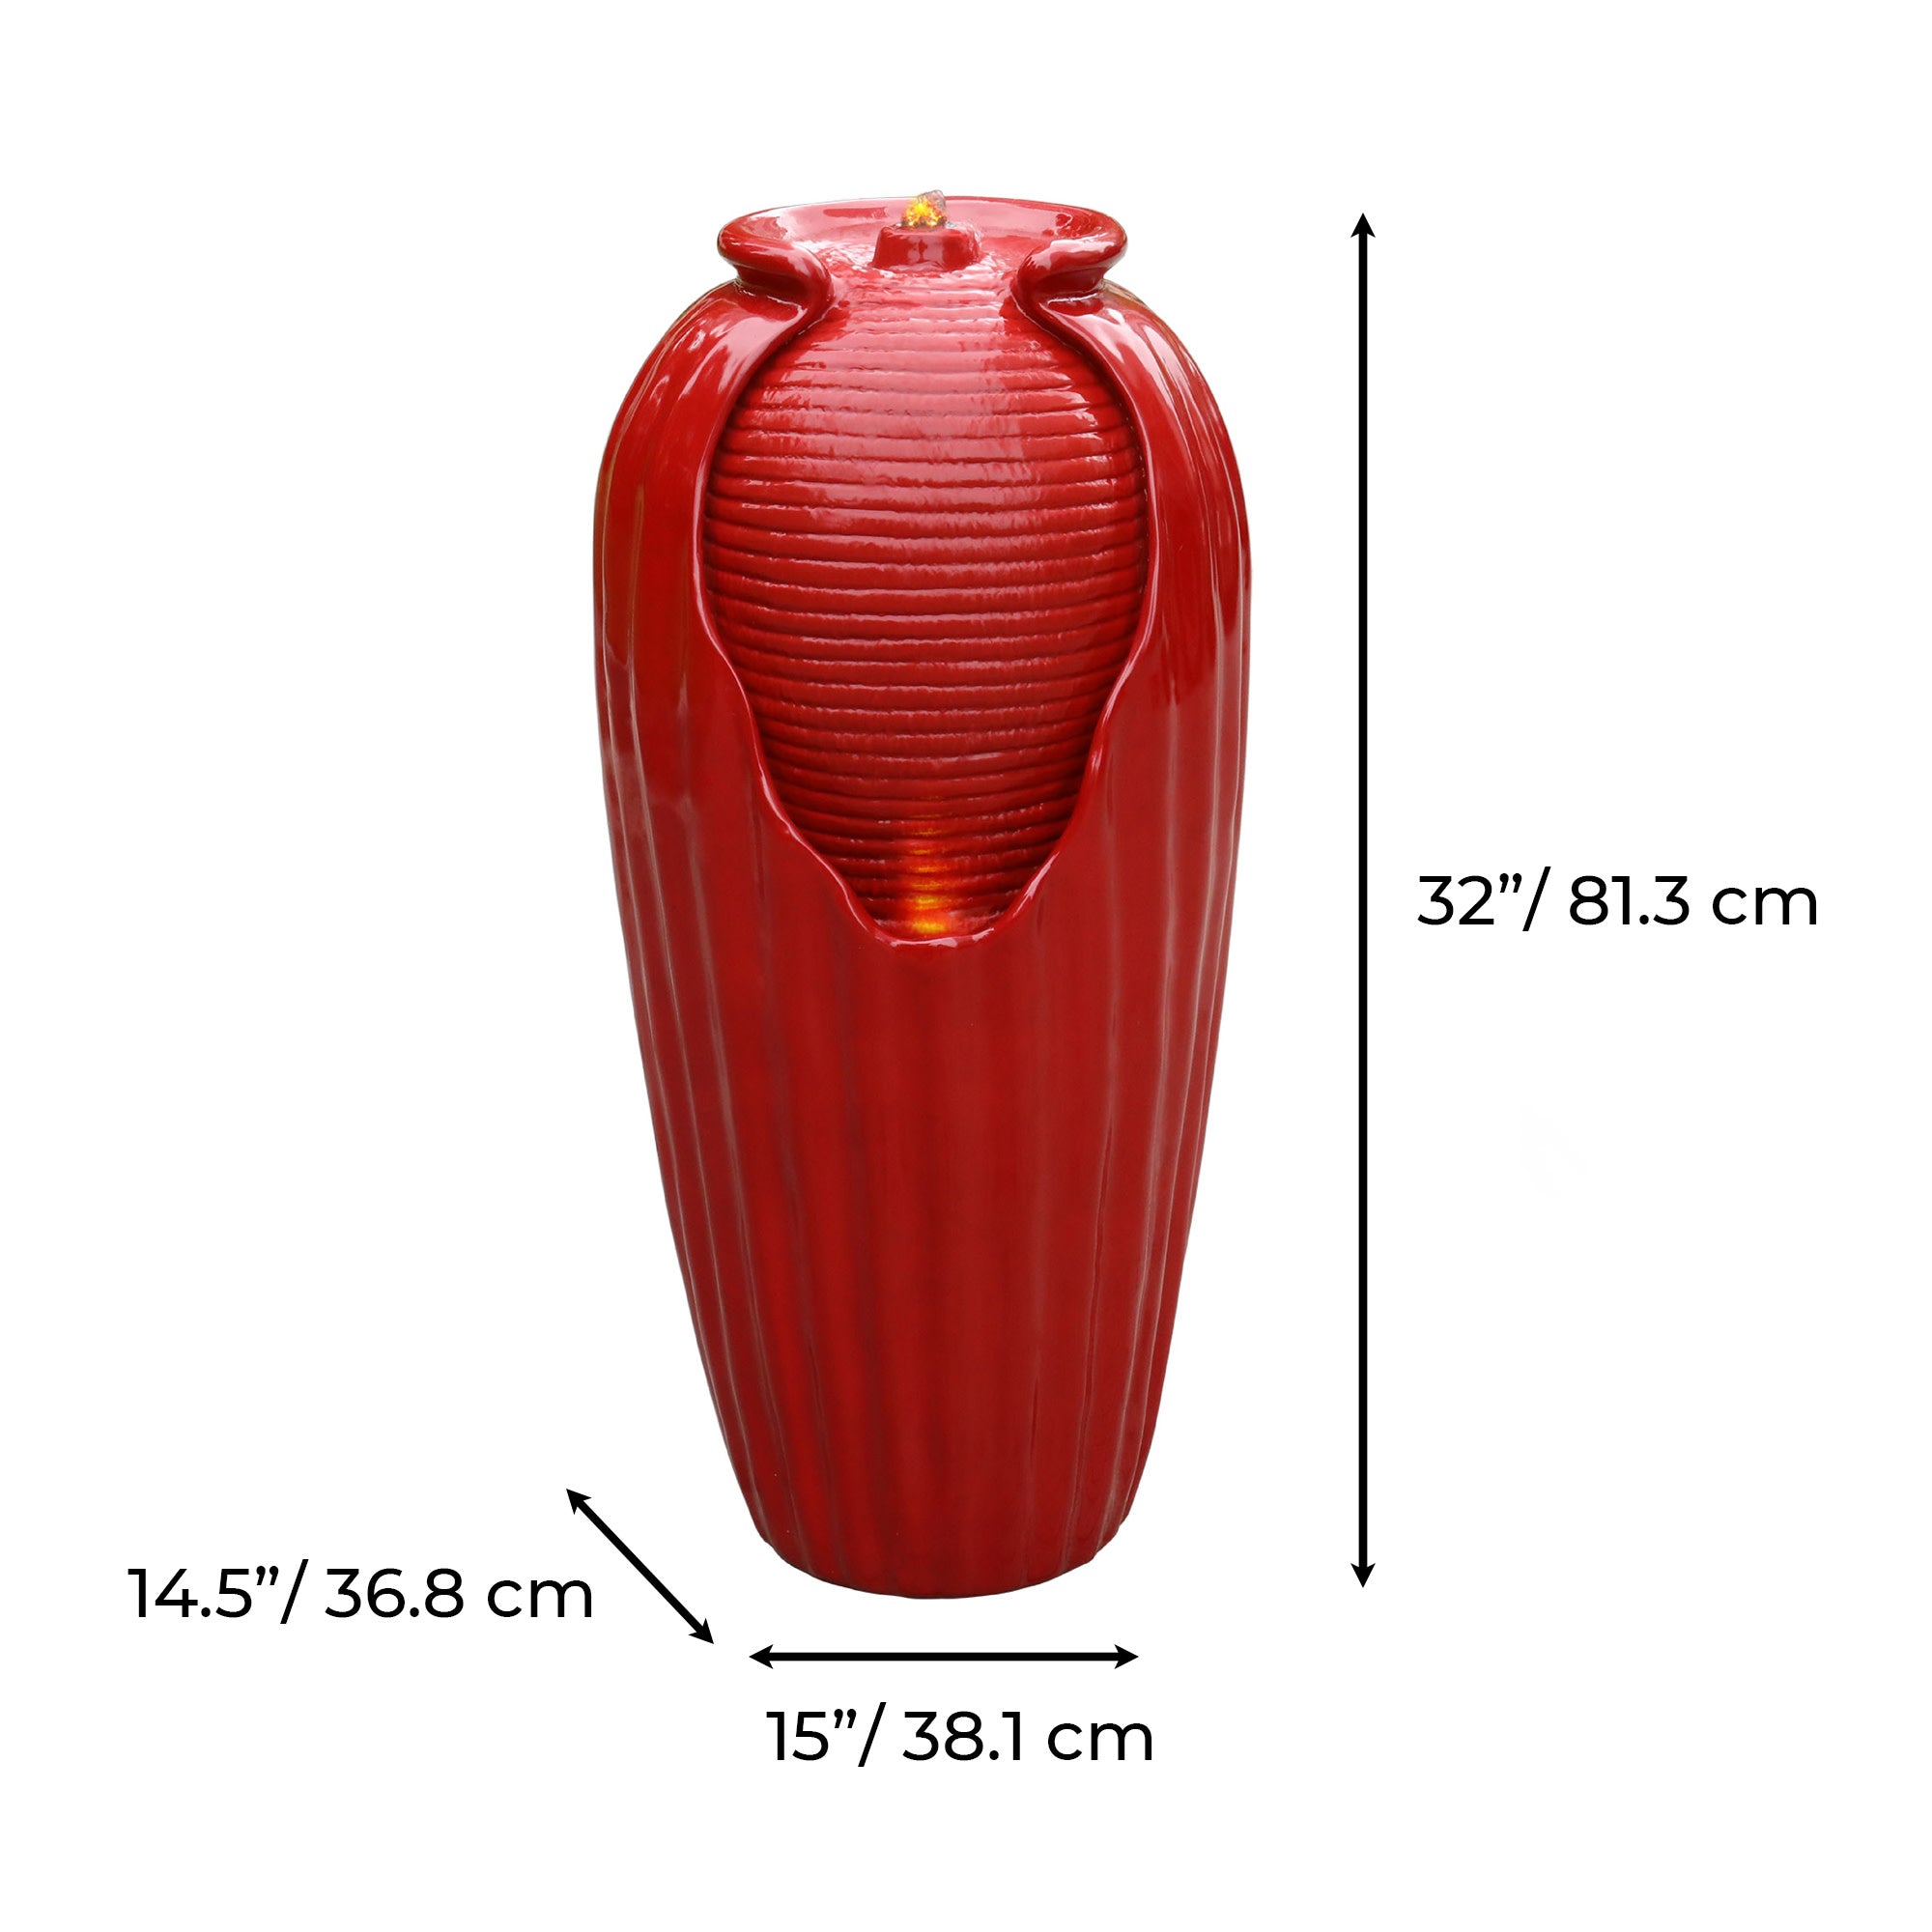 Teamson Home Indoor/Outdoor Contemporary Glazed Contoured Vase Water Fountain with LED Lights, Red